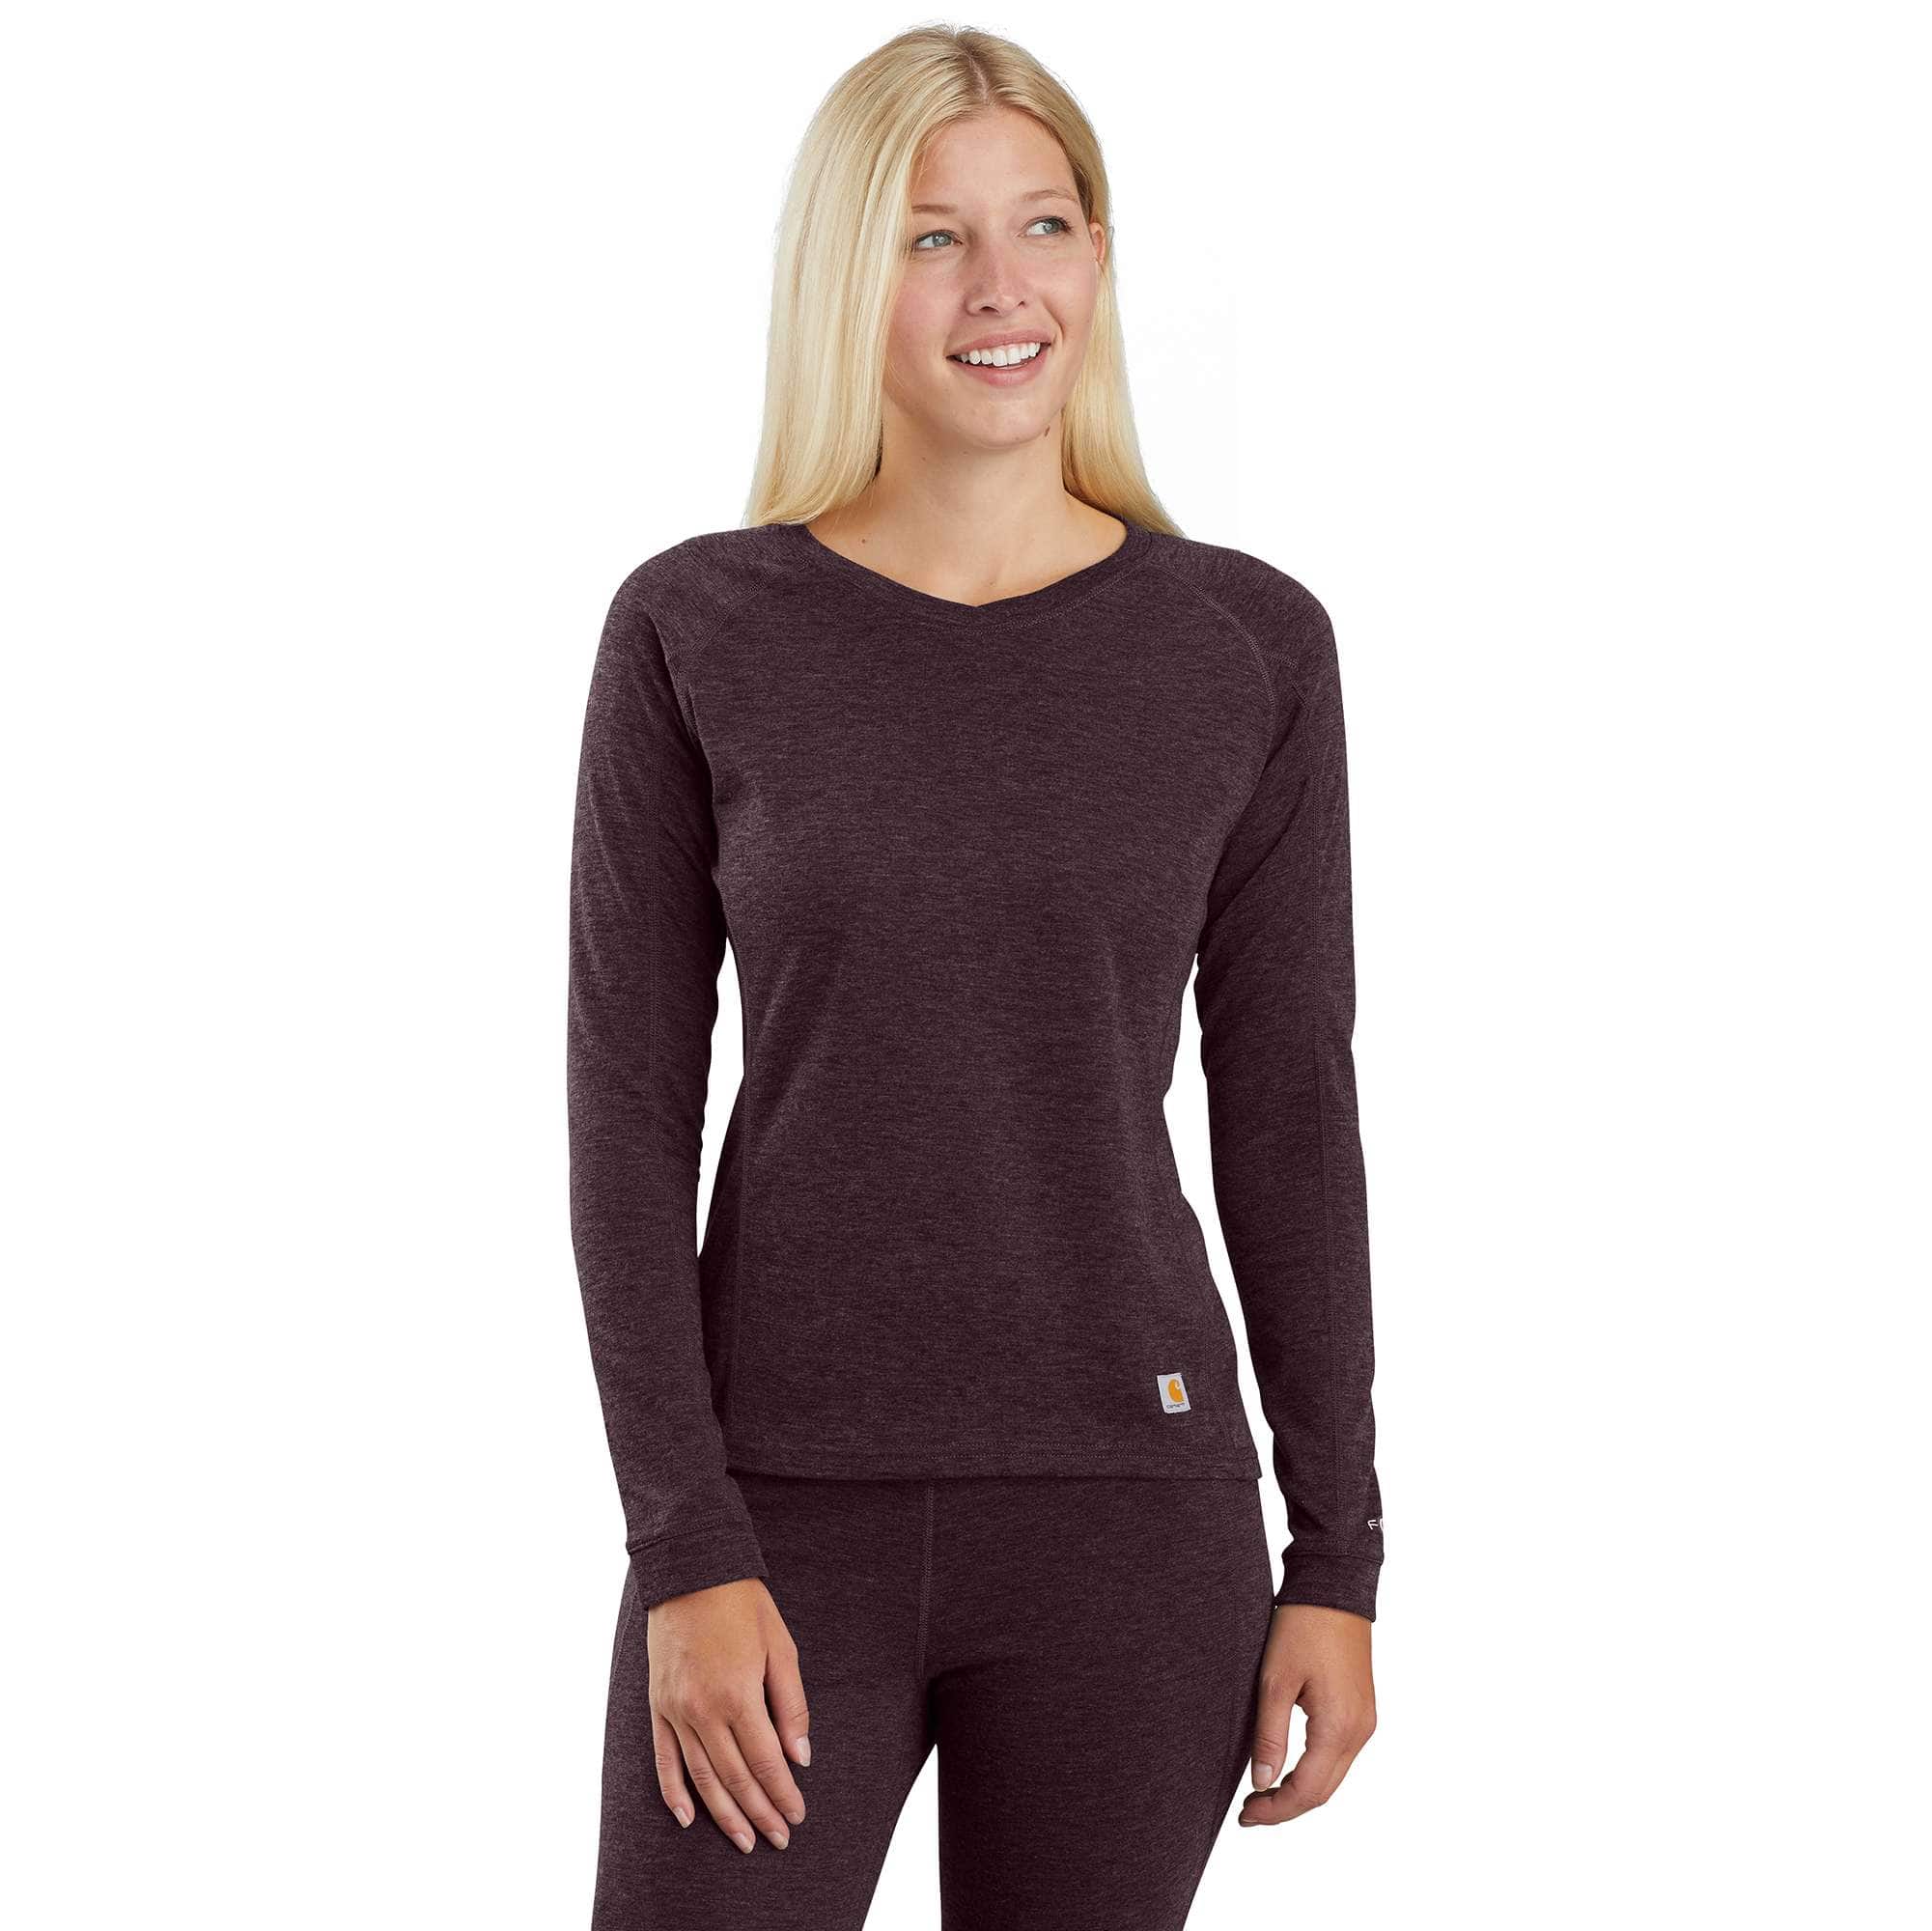 Women's Base Layer Thermal Shirt - Carhartt Force® - Midweight - Poly-Wool, Accessories Best Sellers